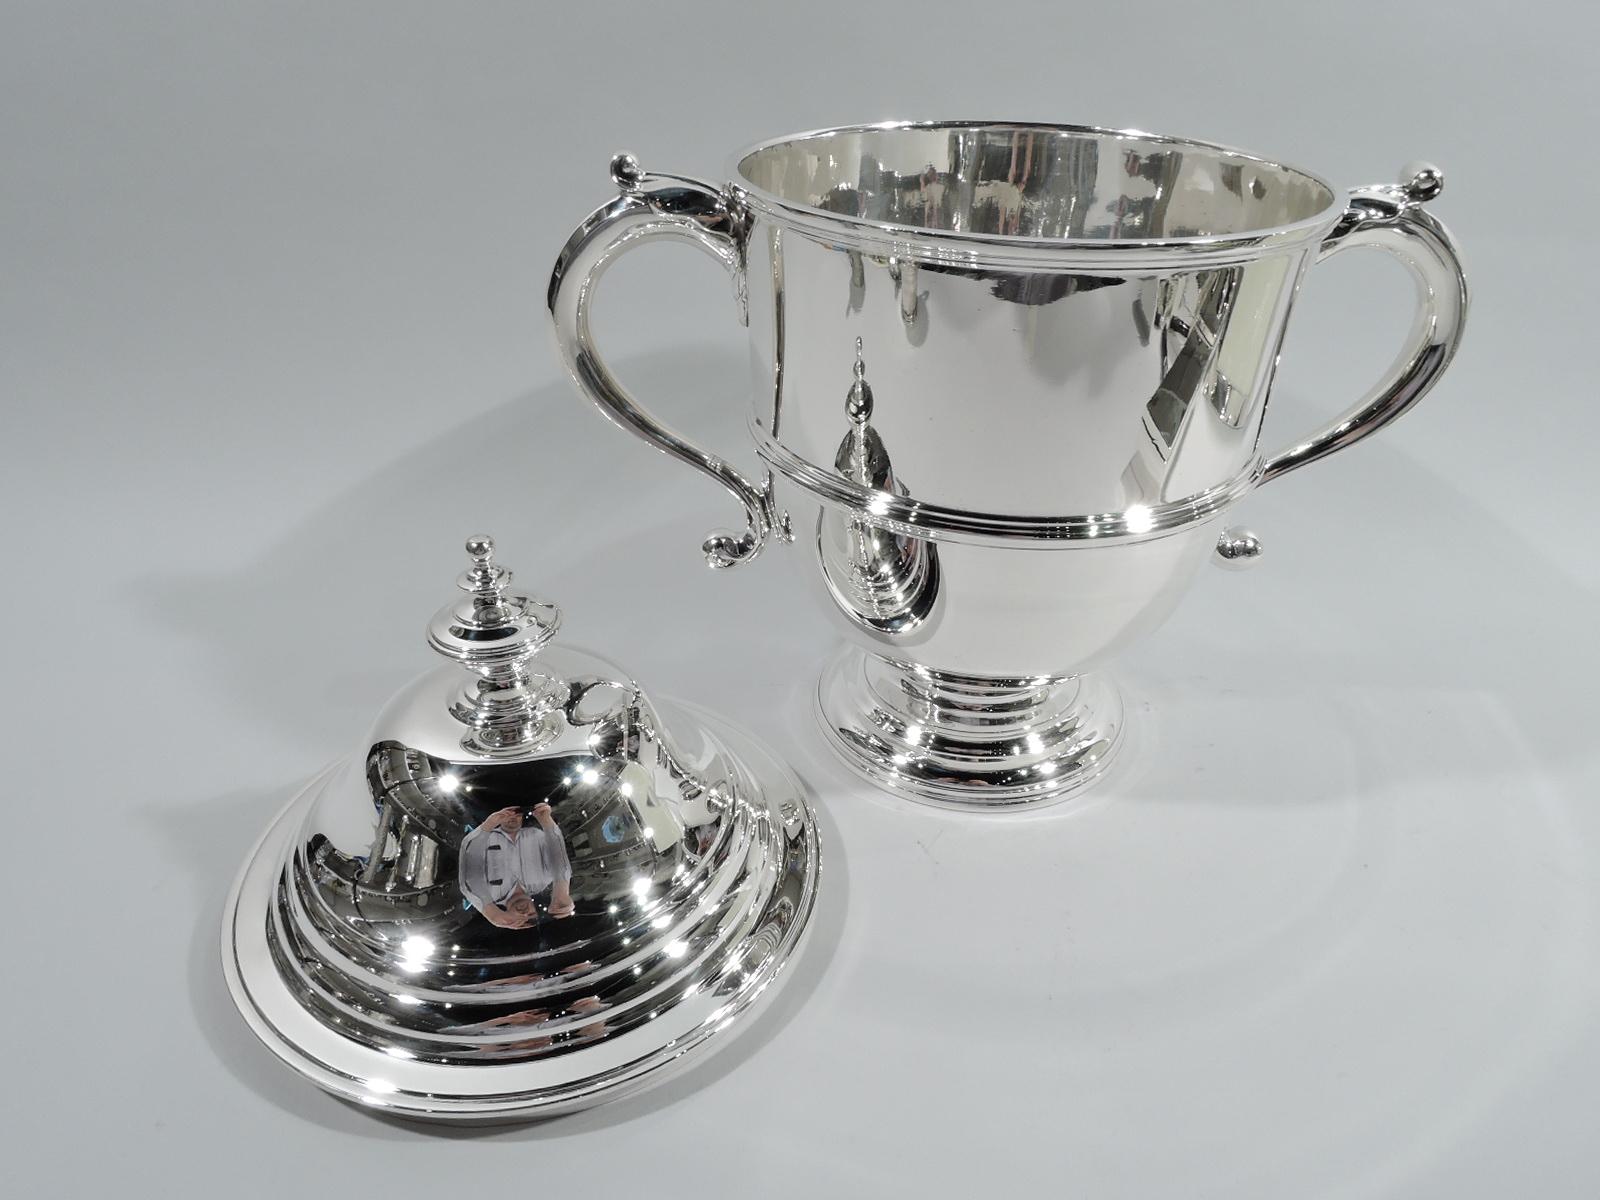 Neoclassical Traditional Classical Covered Urn Trophy Cup by Currier & Roby For Sale